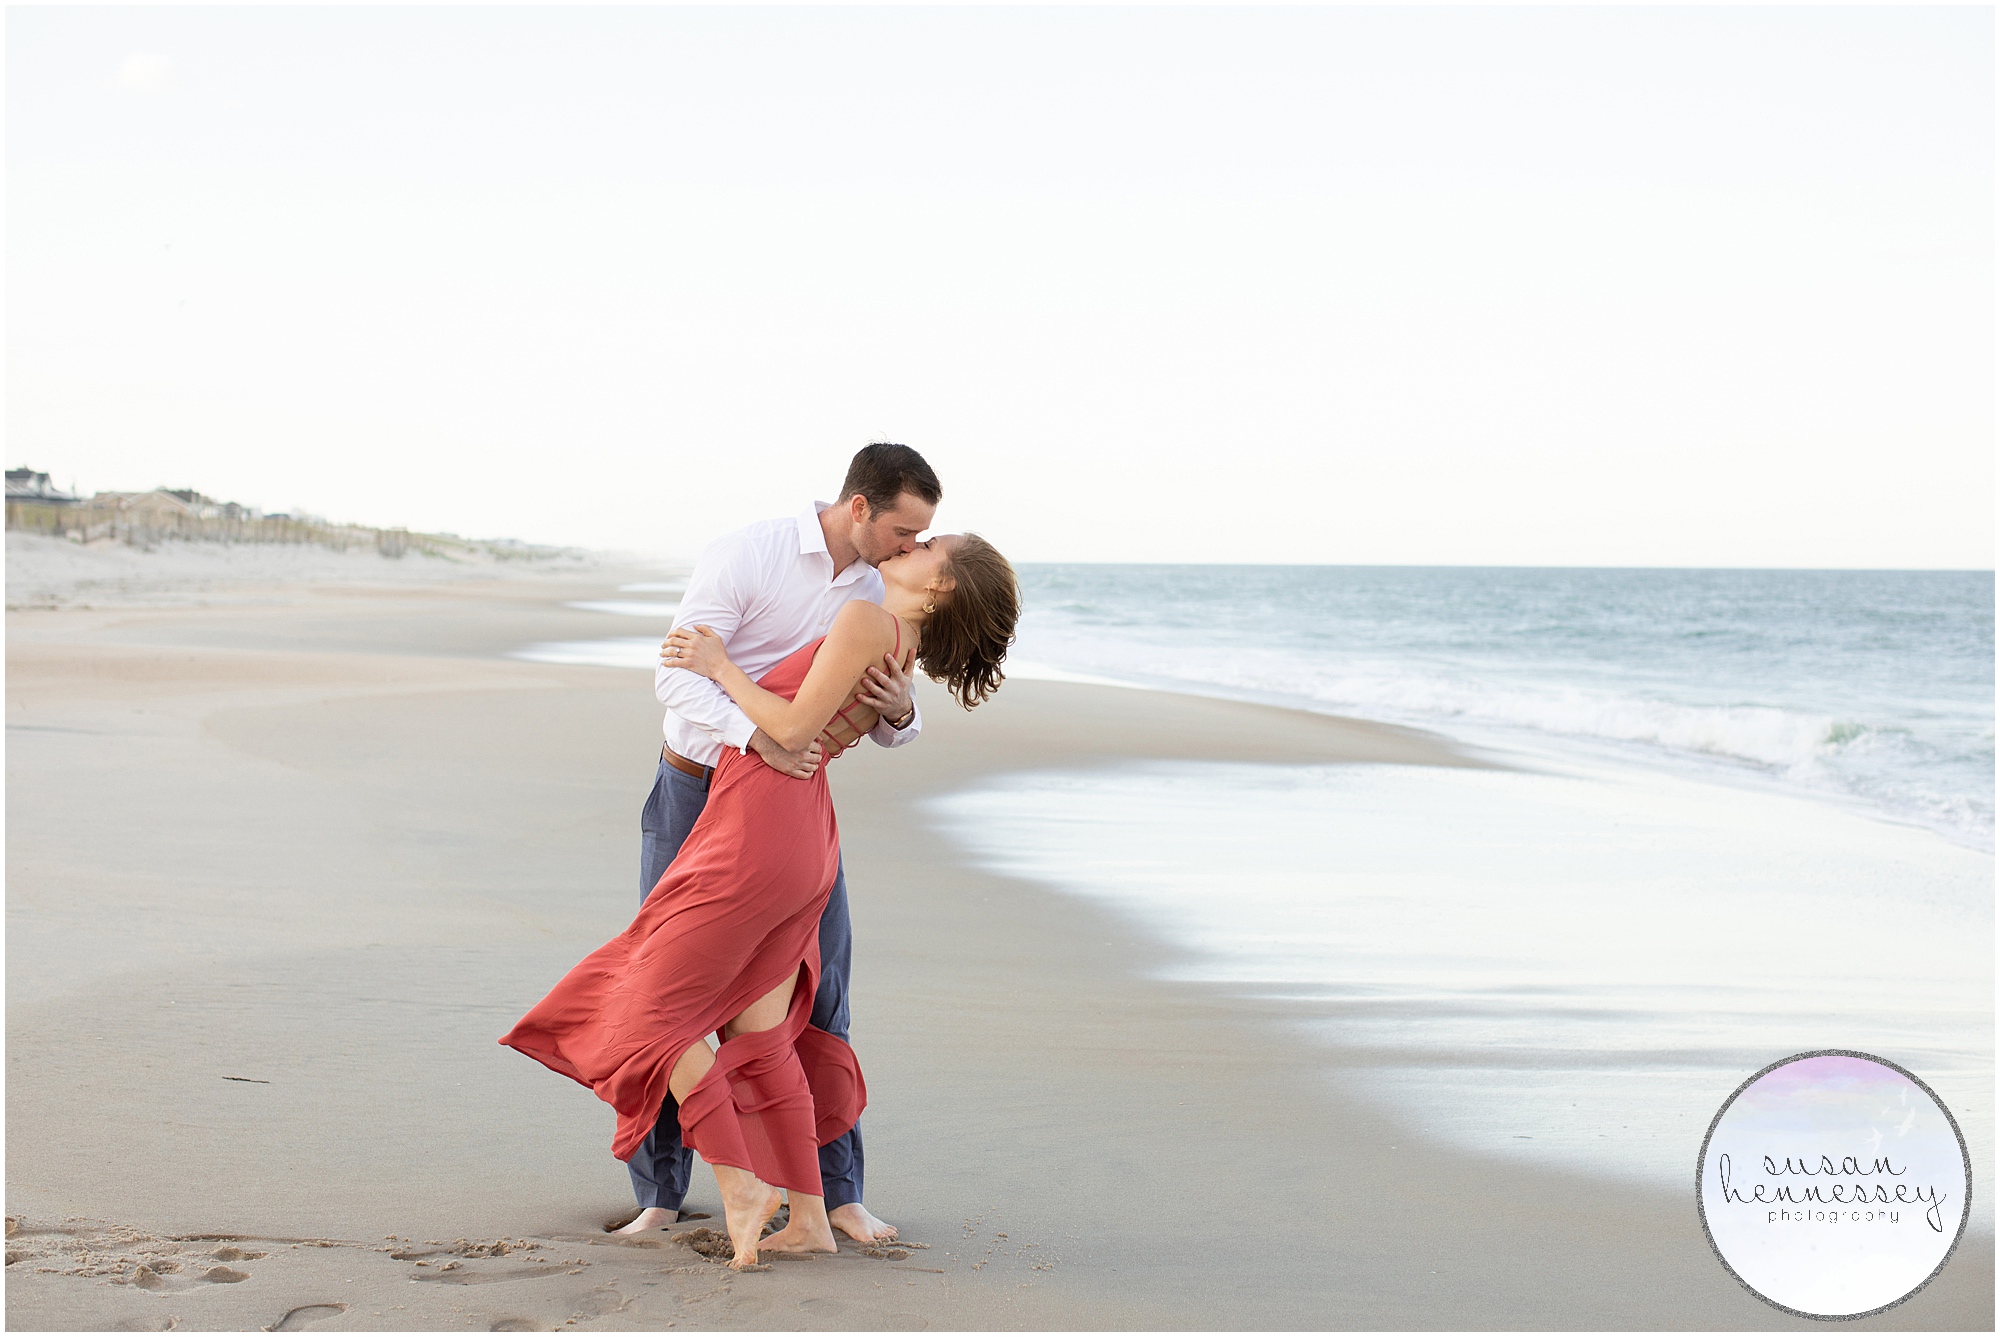 An LBI engagement session